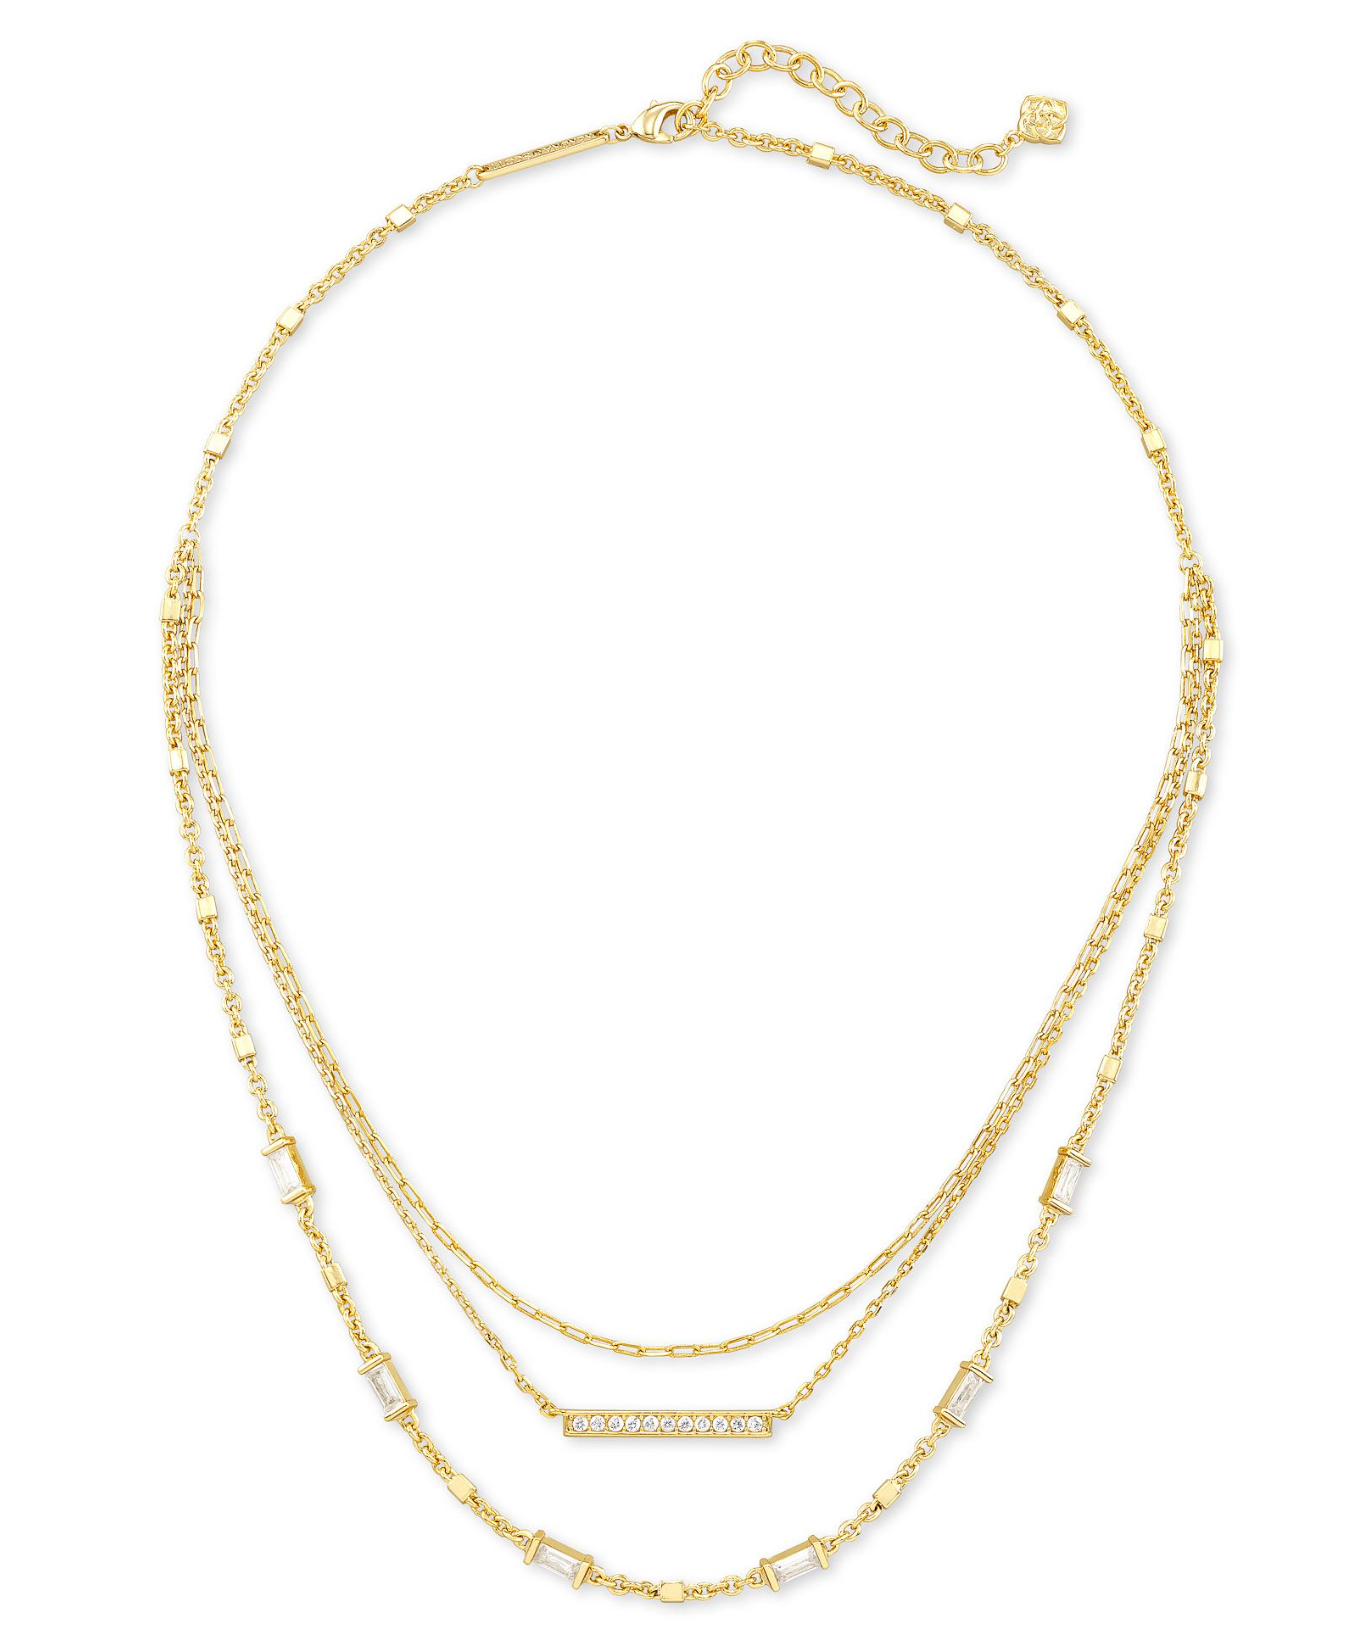 KENDRA SCOTT Addison Tripple Strand Necklace in Gold - The Street Boutique 